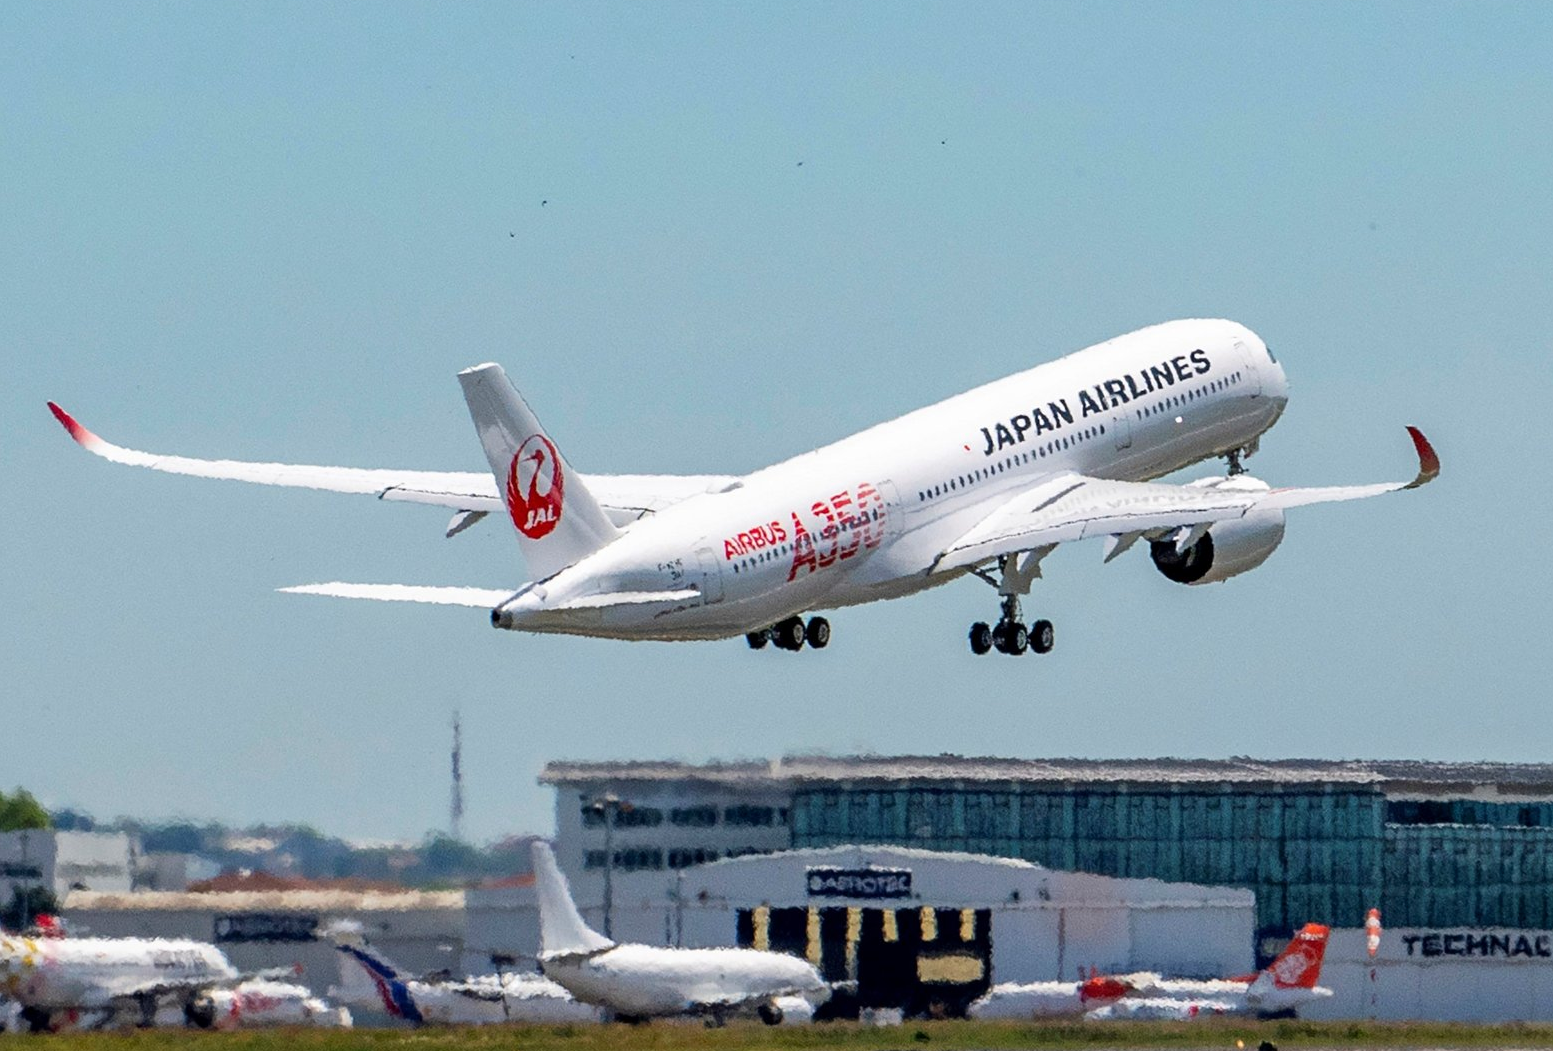 Japan Airlines Now Has Ten Airbus A350s In Service